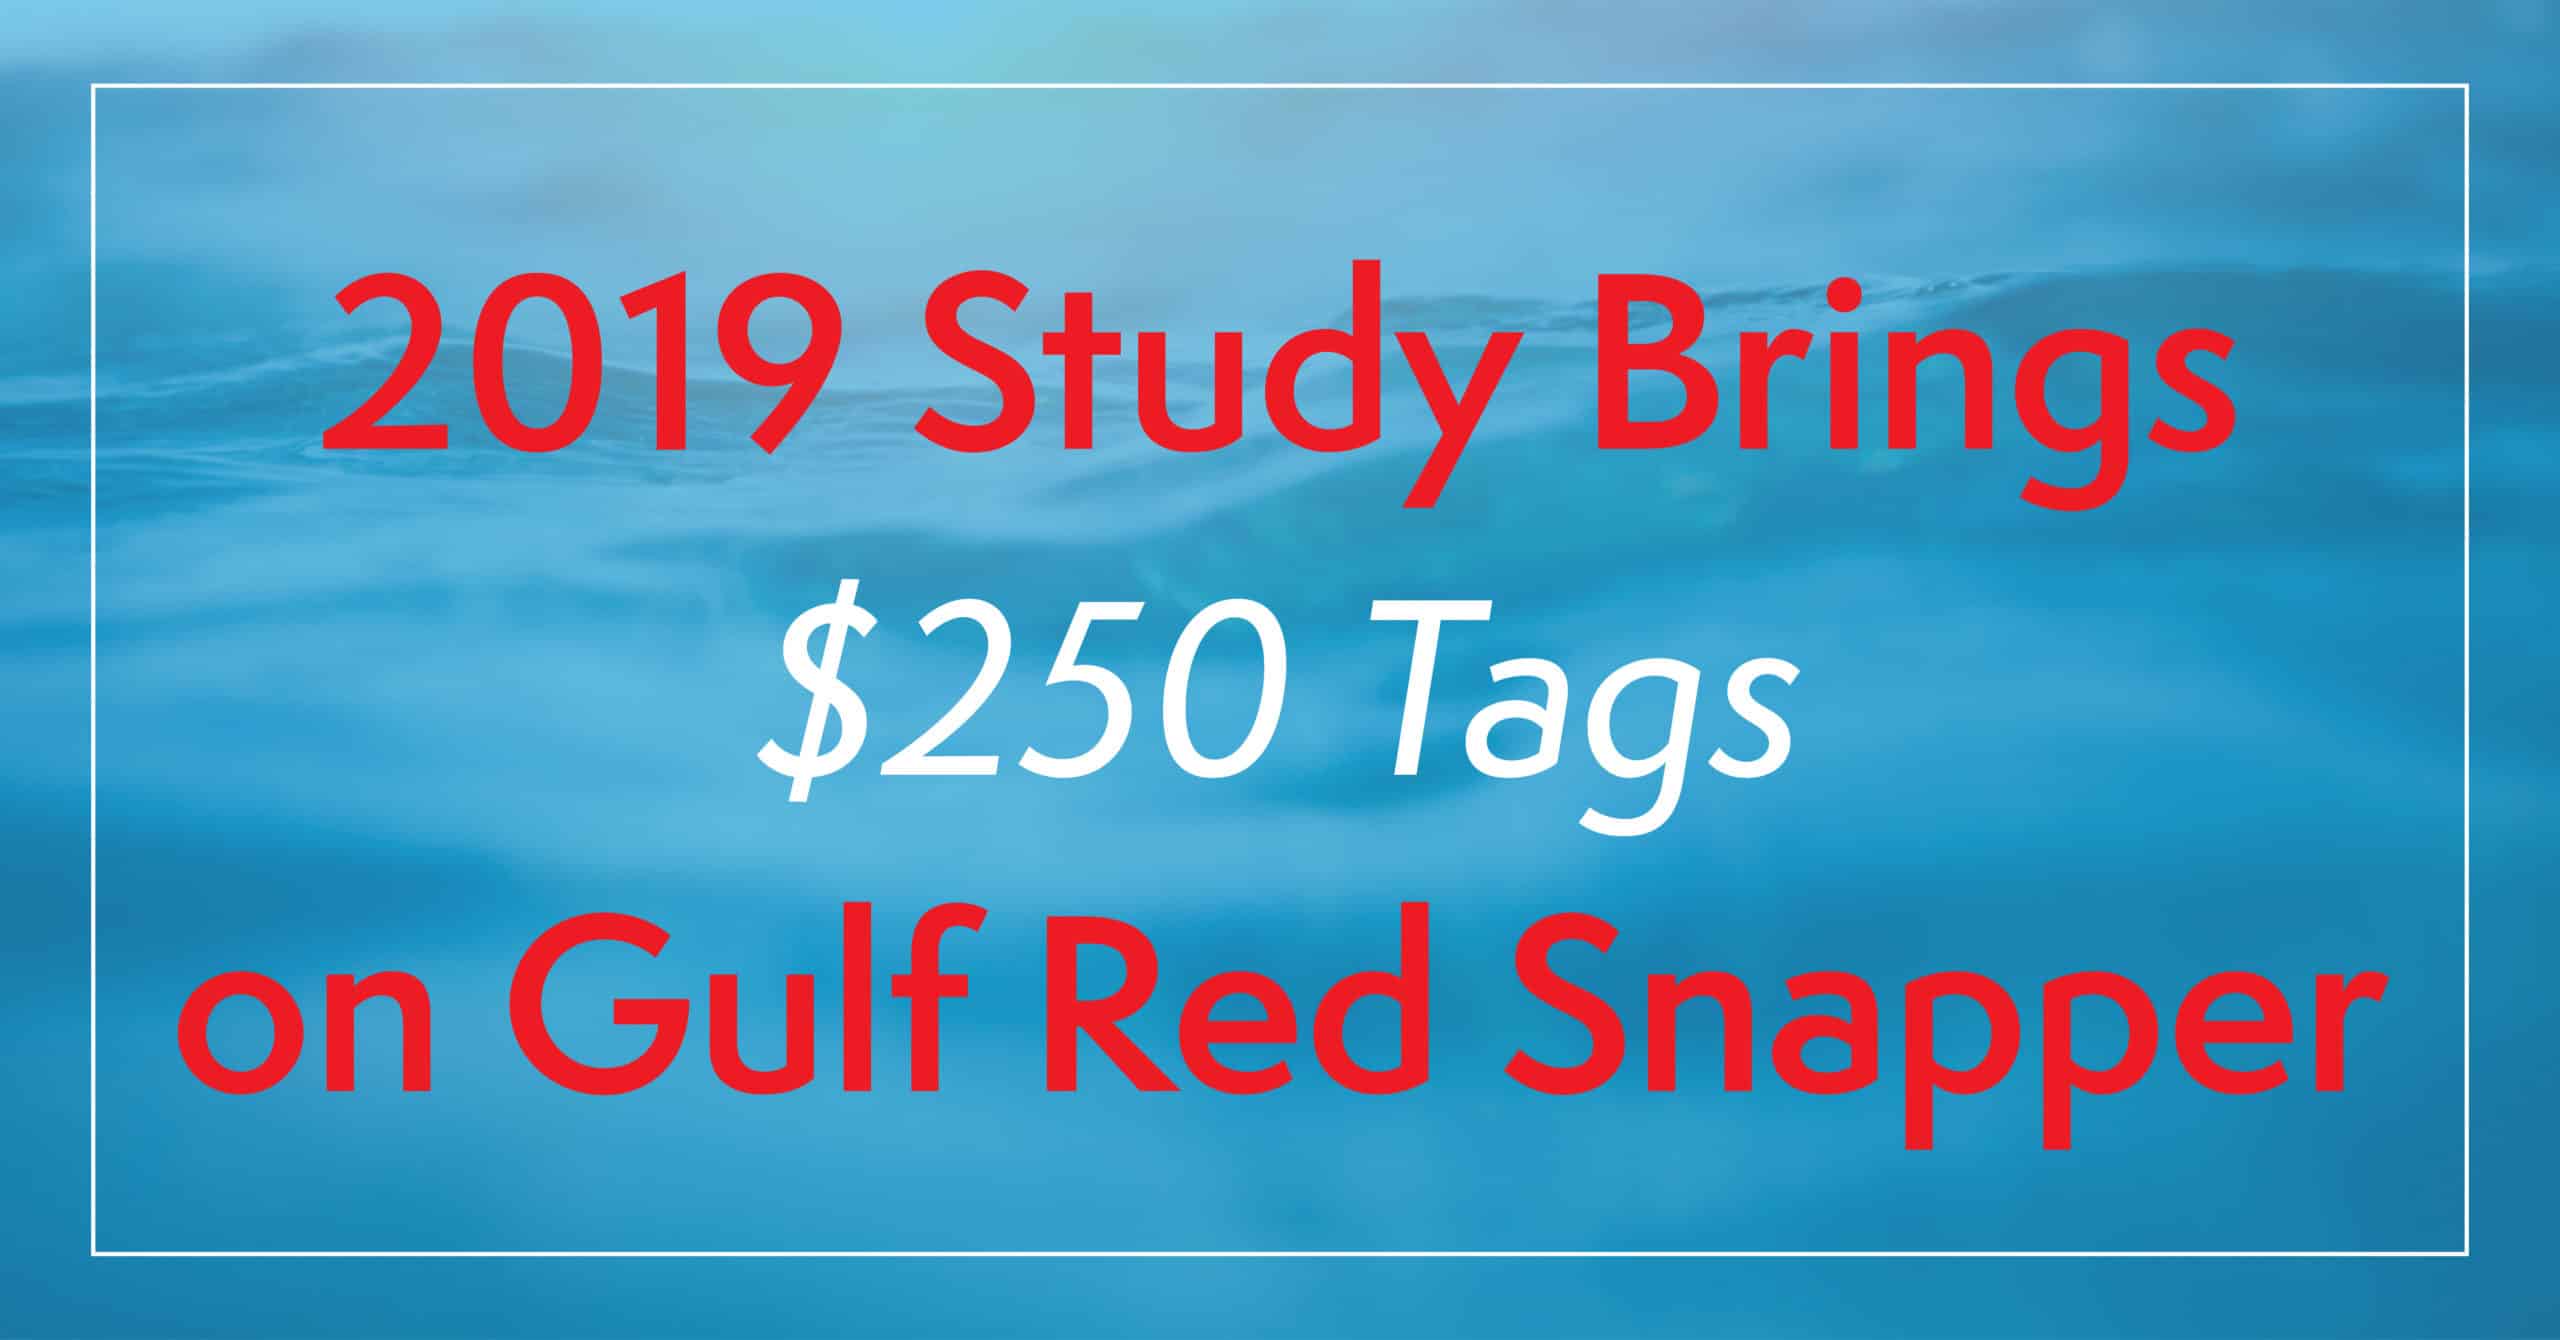 2019 Study Brings $250 Tags on Gulf Red Snapper